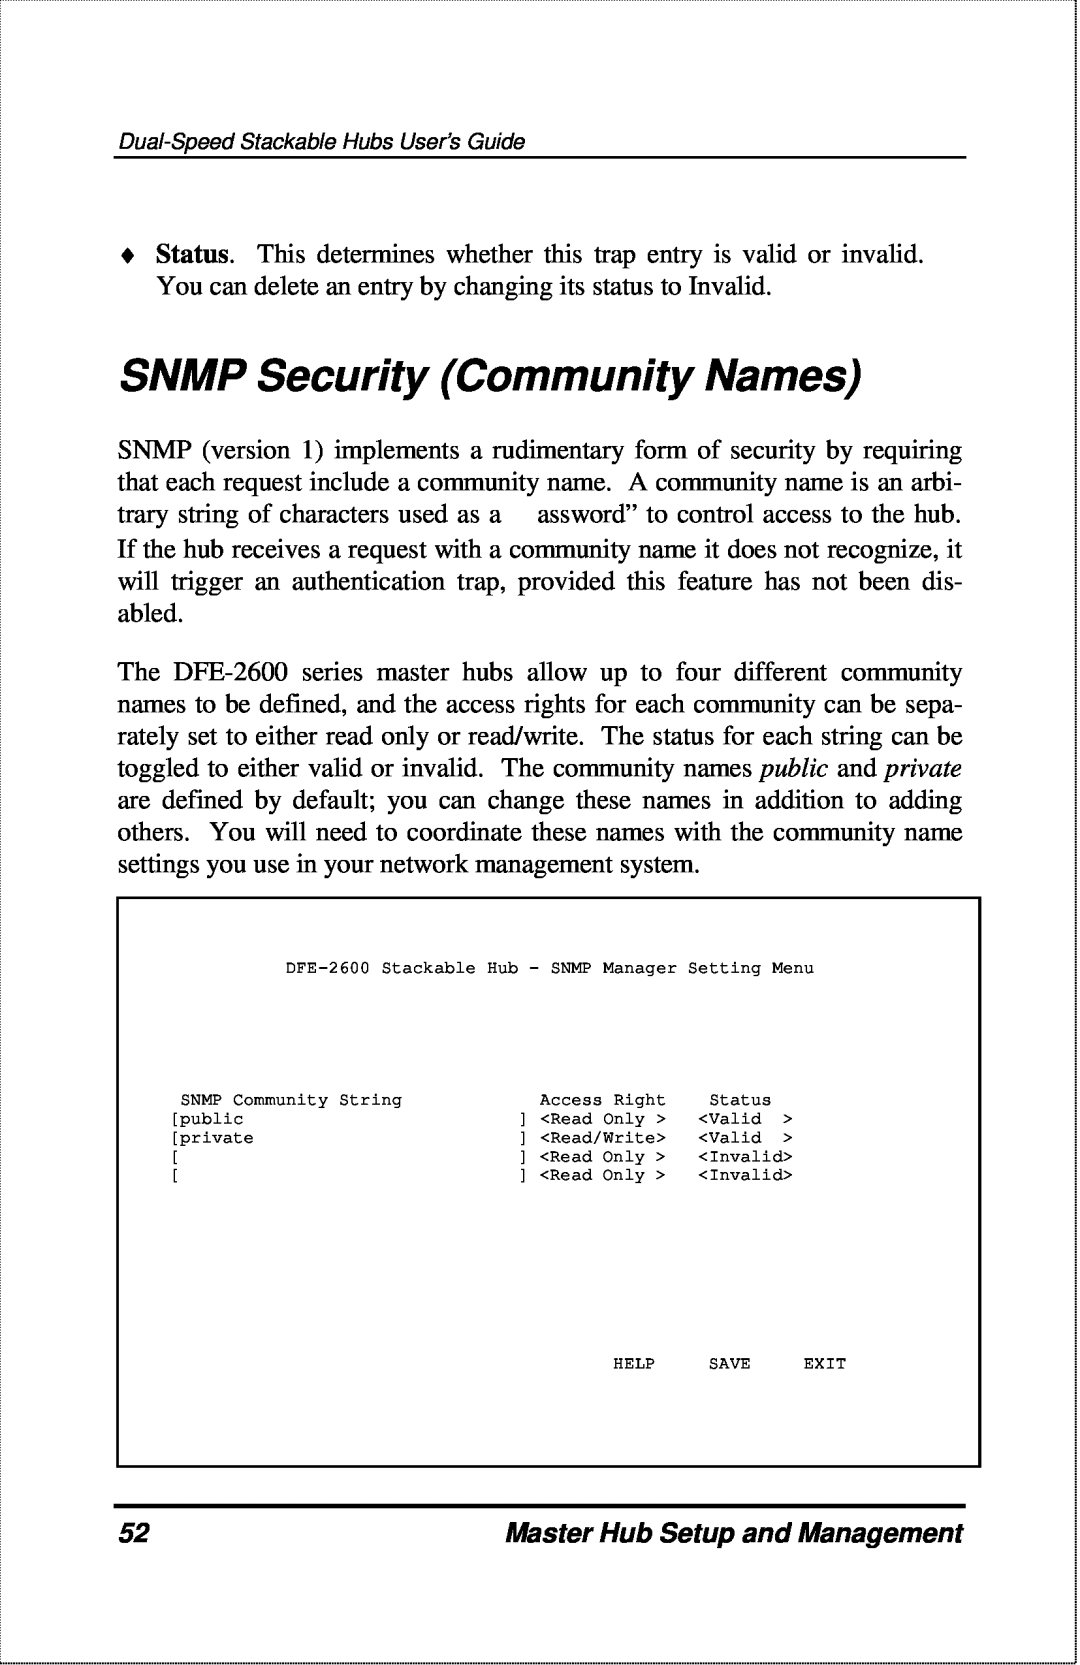 D-Link DFE-2600 manual SNMP Security Community Names, Master Hub Setup and Management 